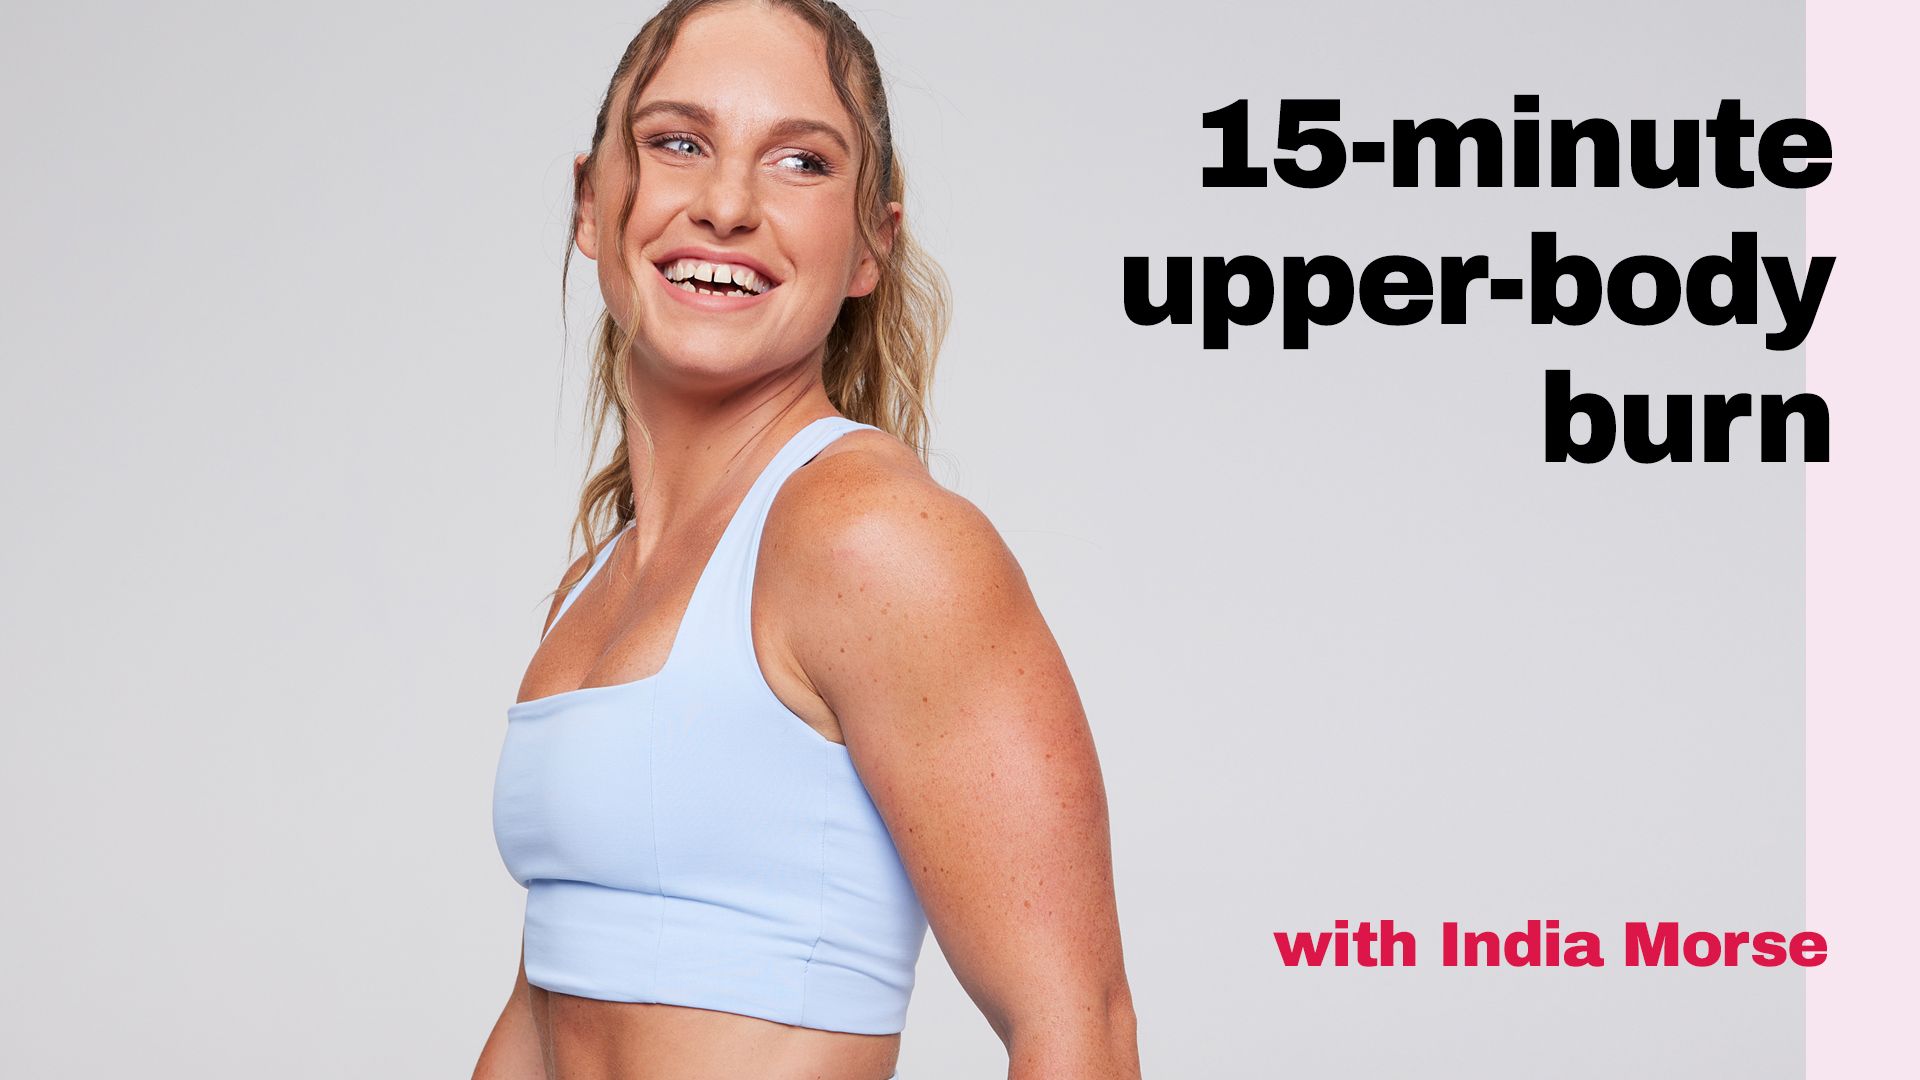 15-minute upper-body burn with India Morse